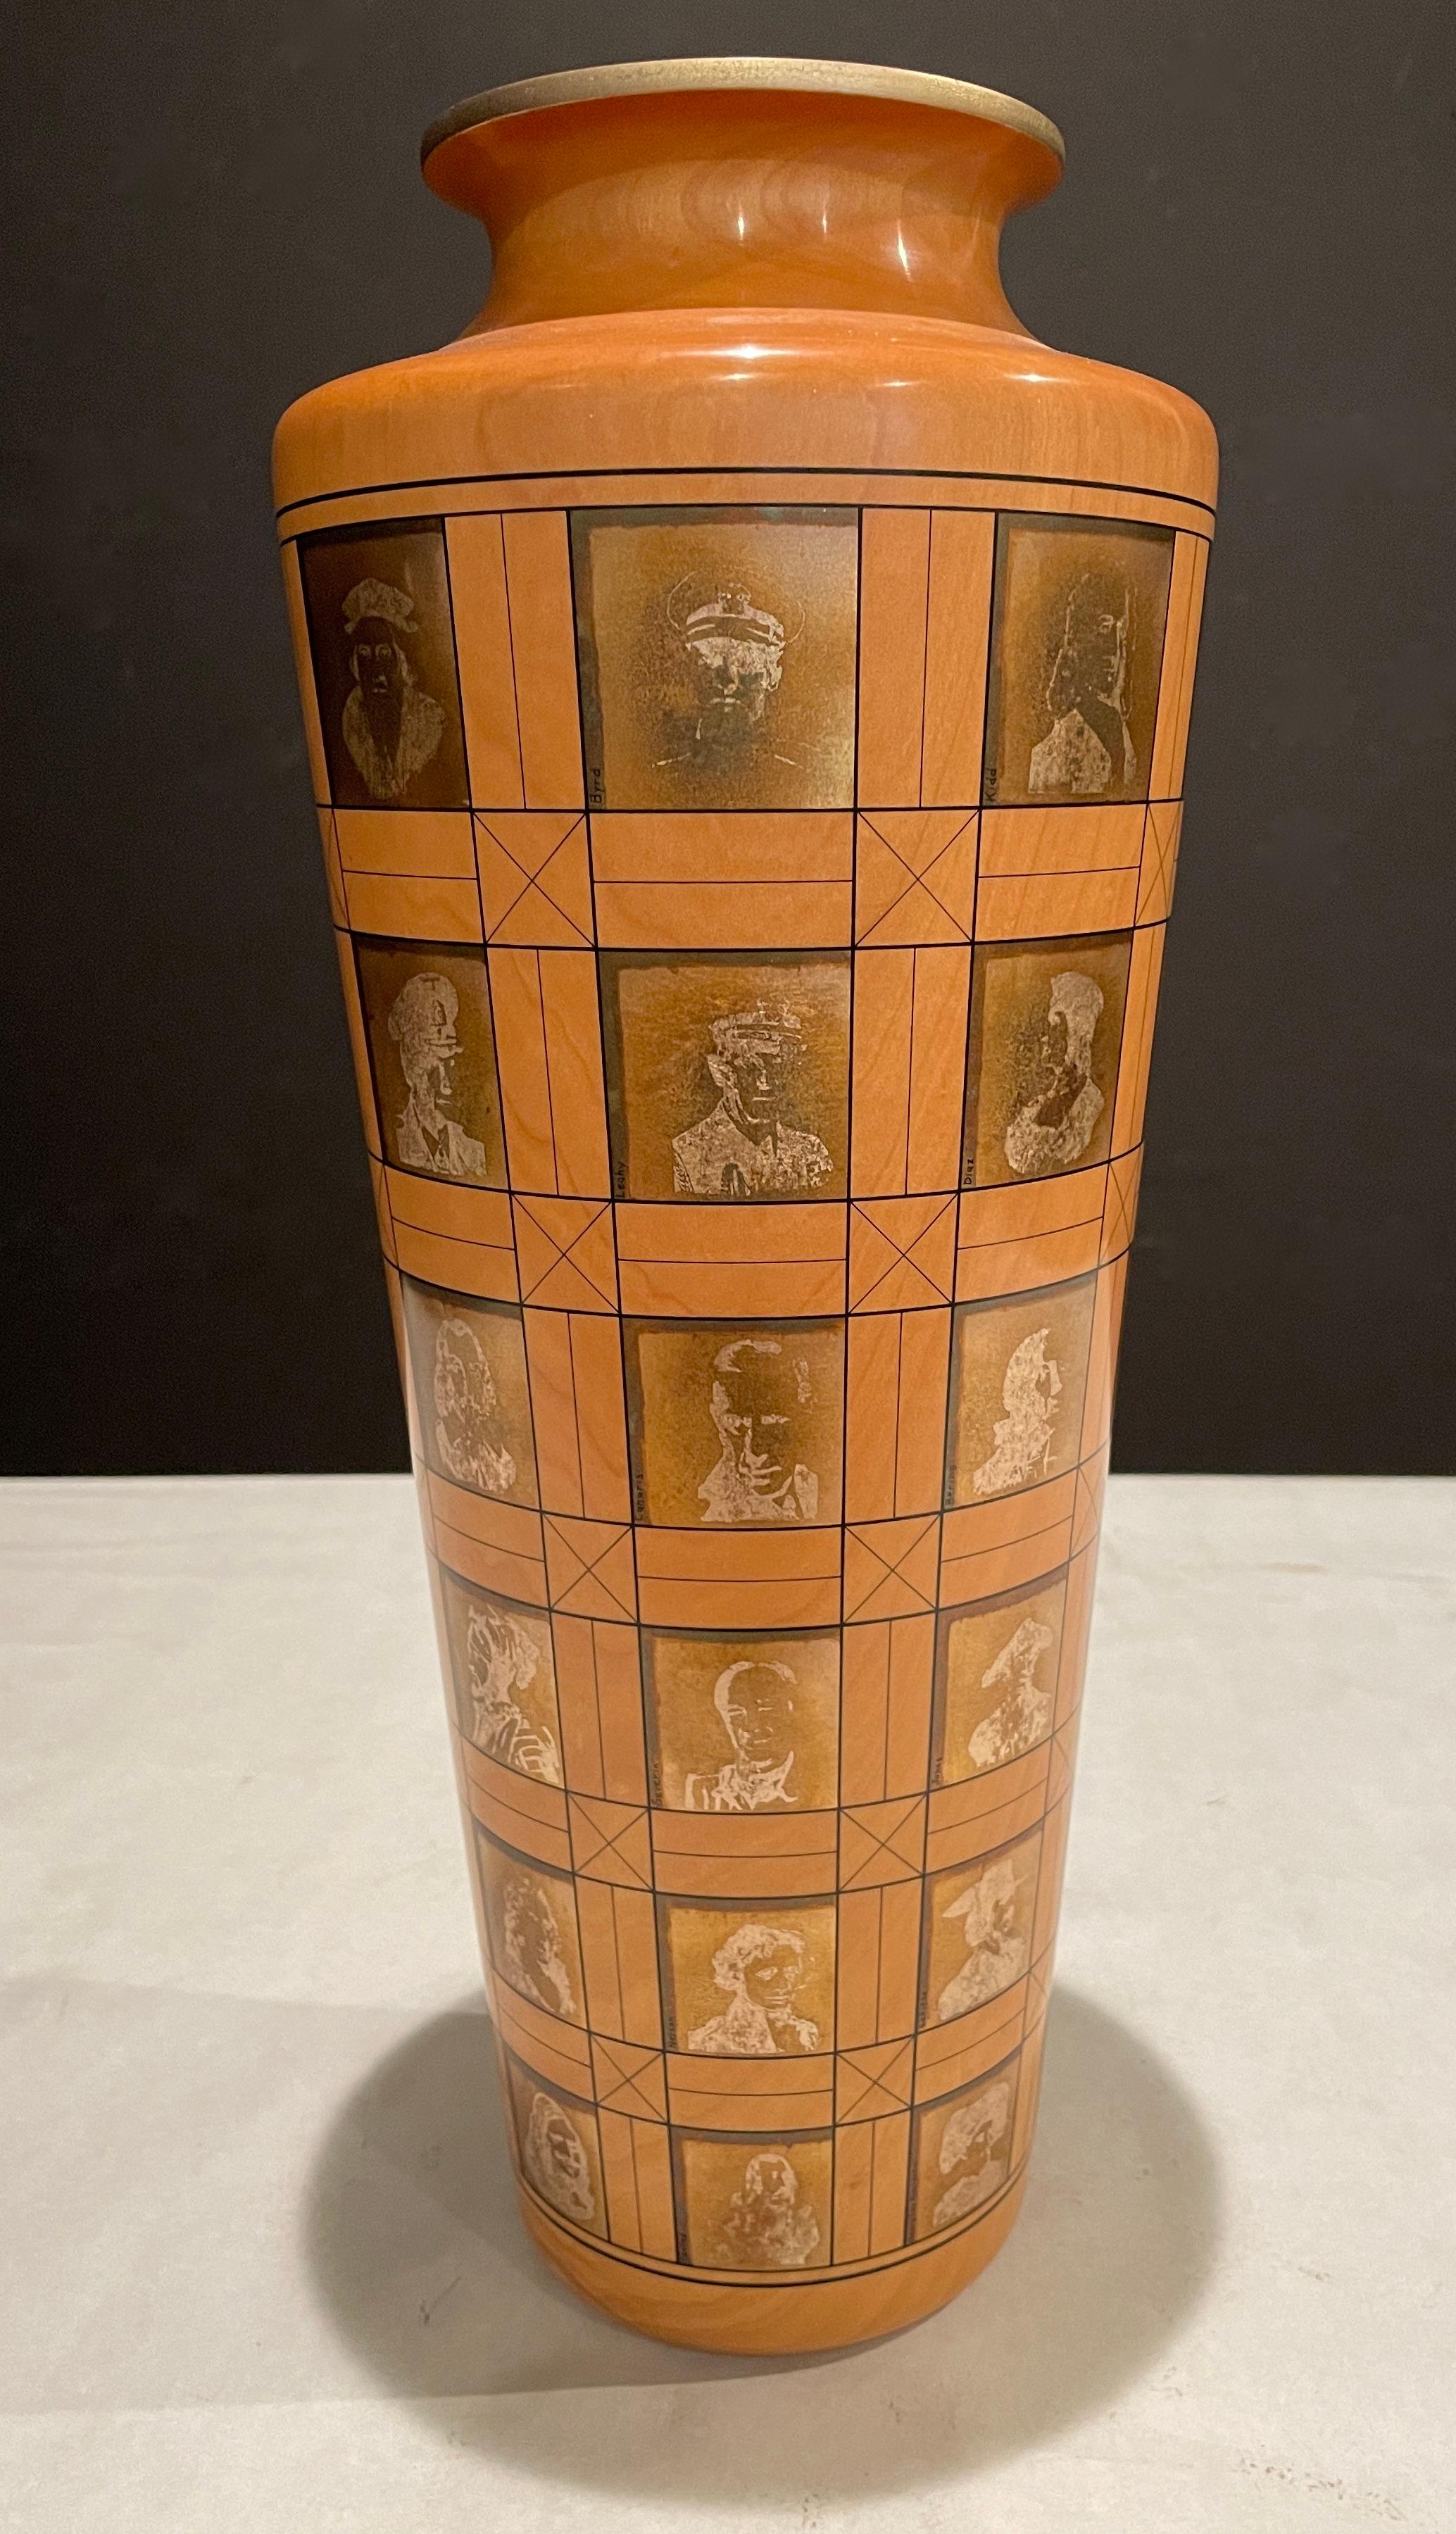 Finest quality turned maple and decorated vase, by Steve Sinner, 